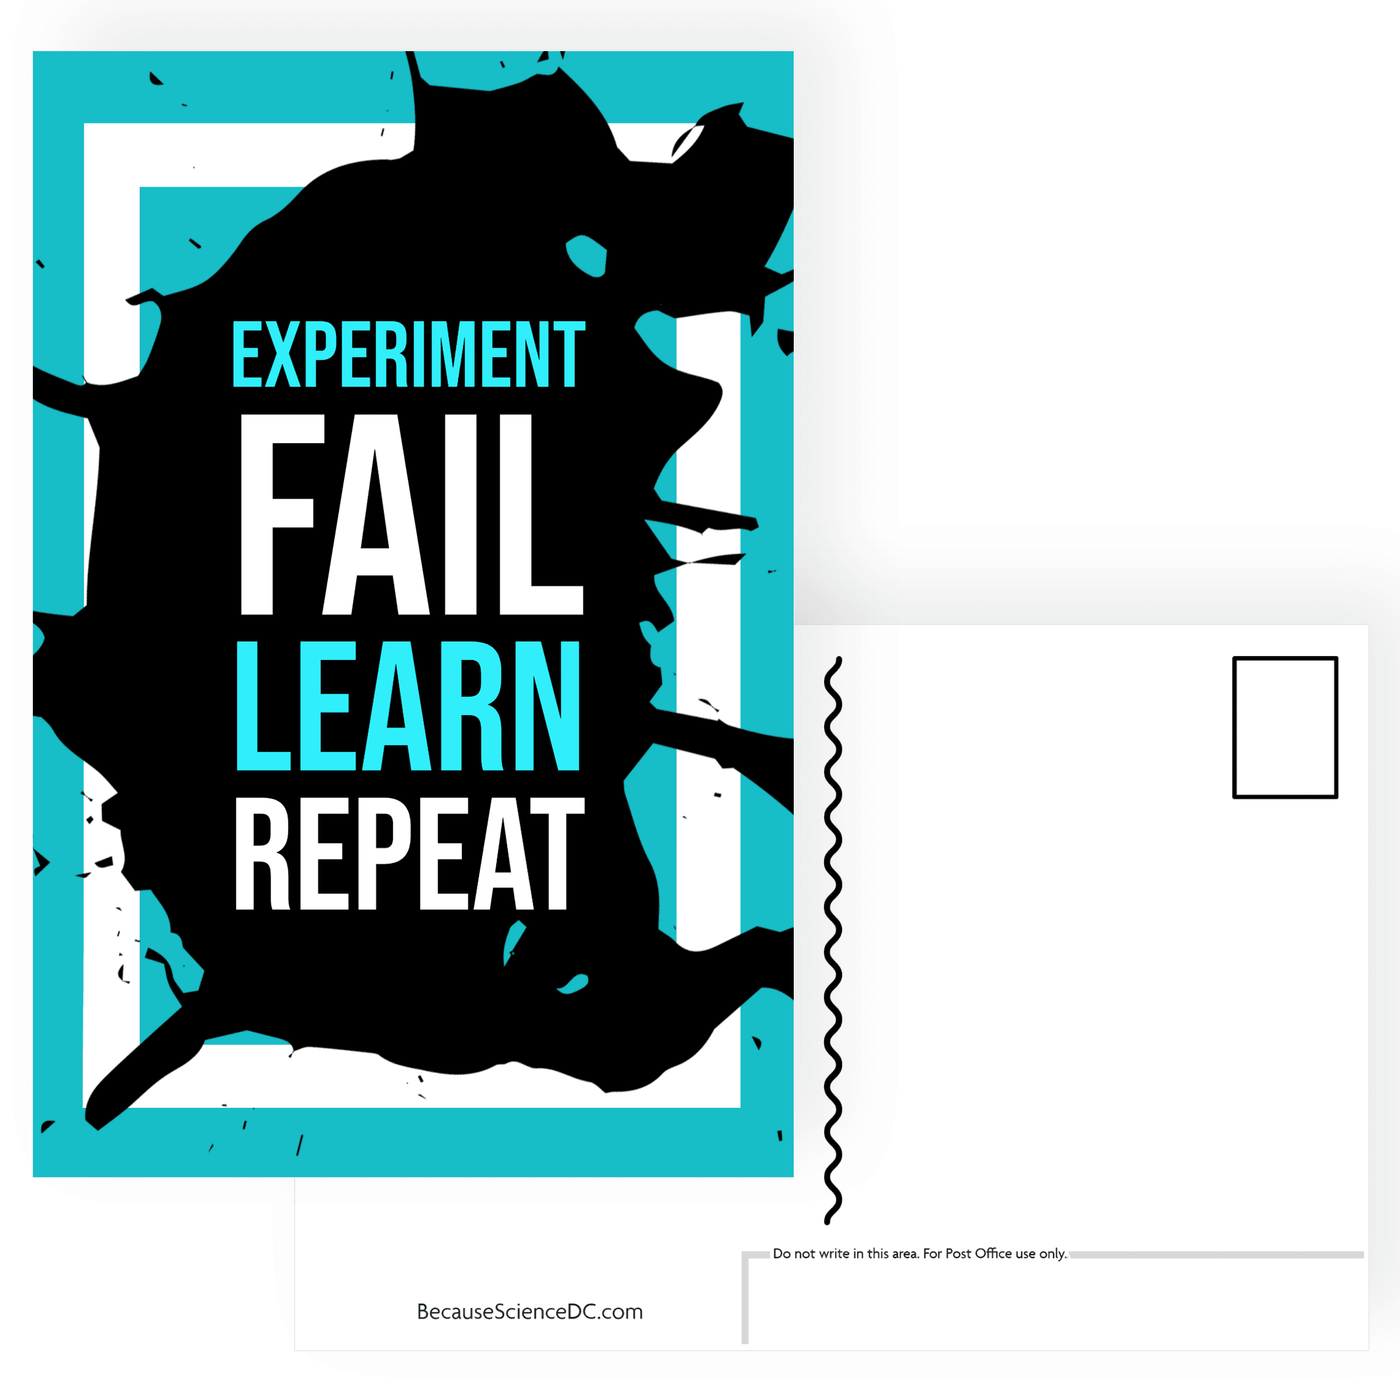 postcard in blue and black that spells out experiment fail learn repeat